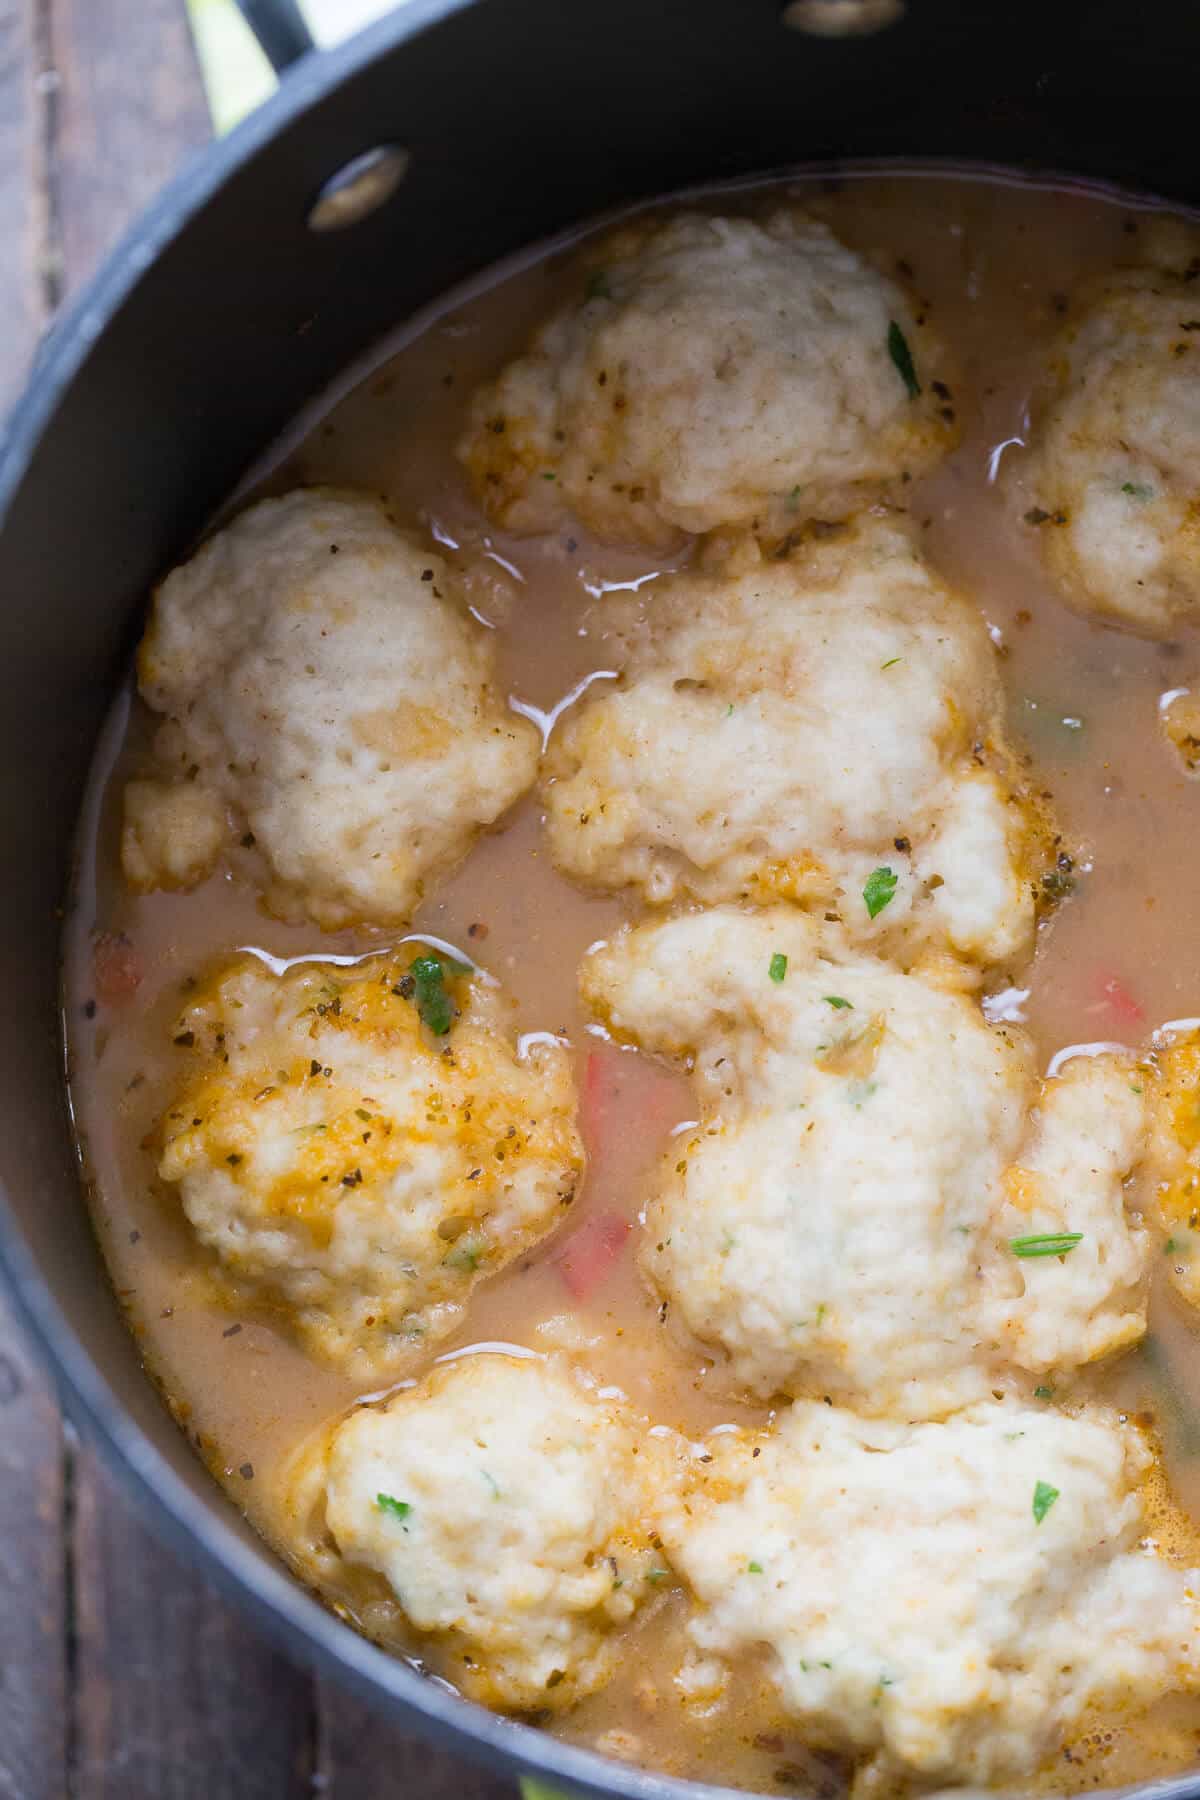 Chicken and dumpling recipe get an update! This Tex-Mex version is going to become a favorite!